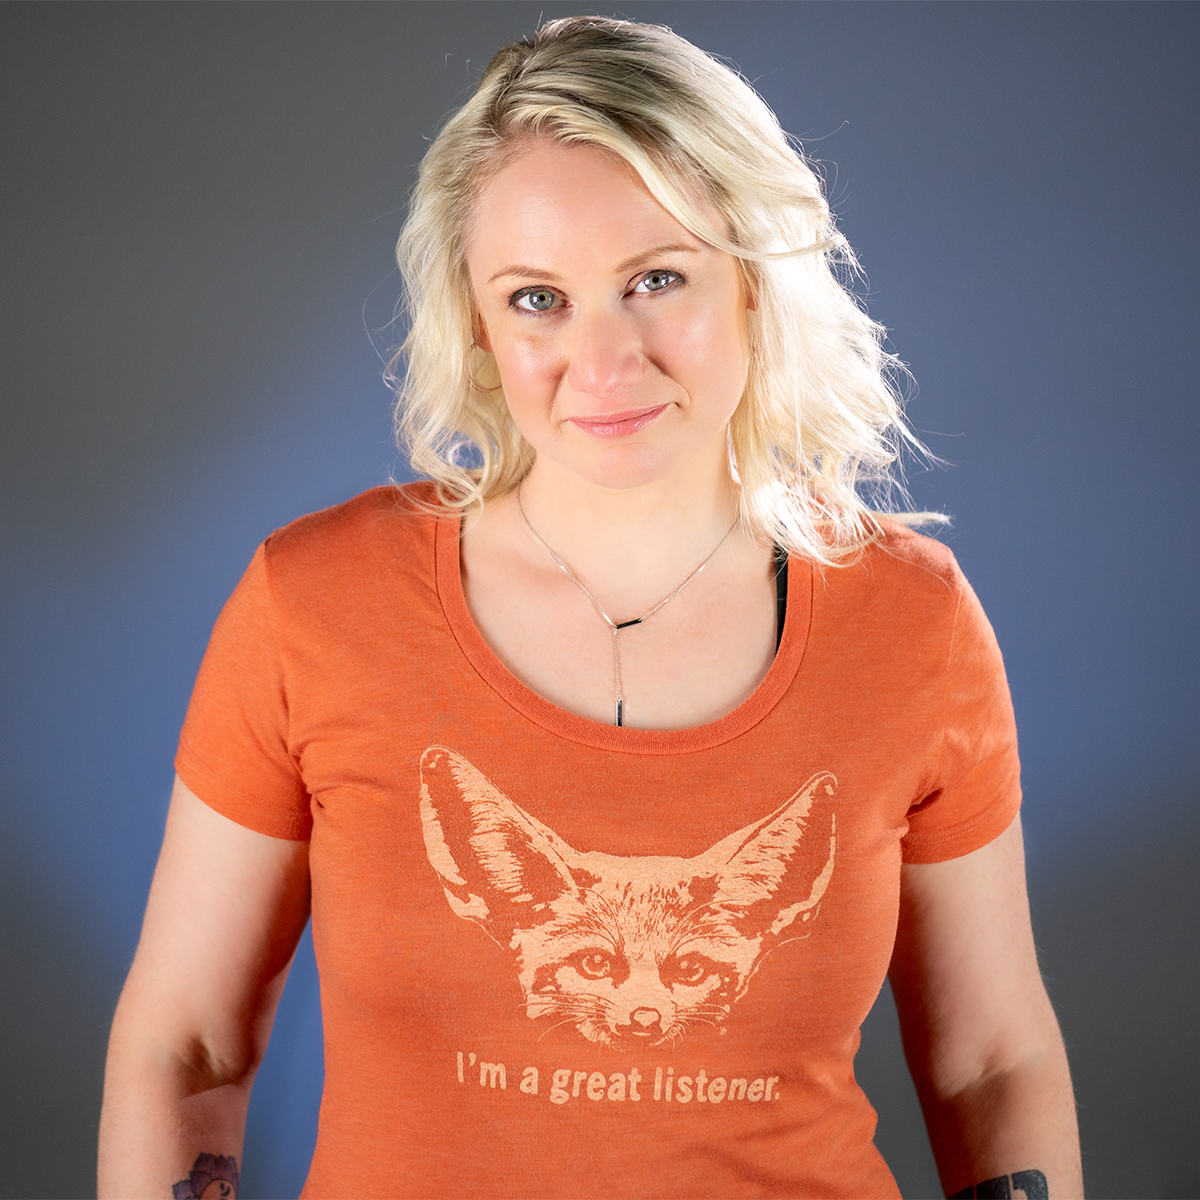 Justine Mastin color portrait. Justine is a white woman with blonde hair and is wearing an orange t-shirt with a fox on it that says I am a great listener. She is smiling and has her arms by her sides.